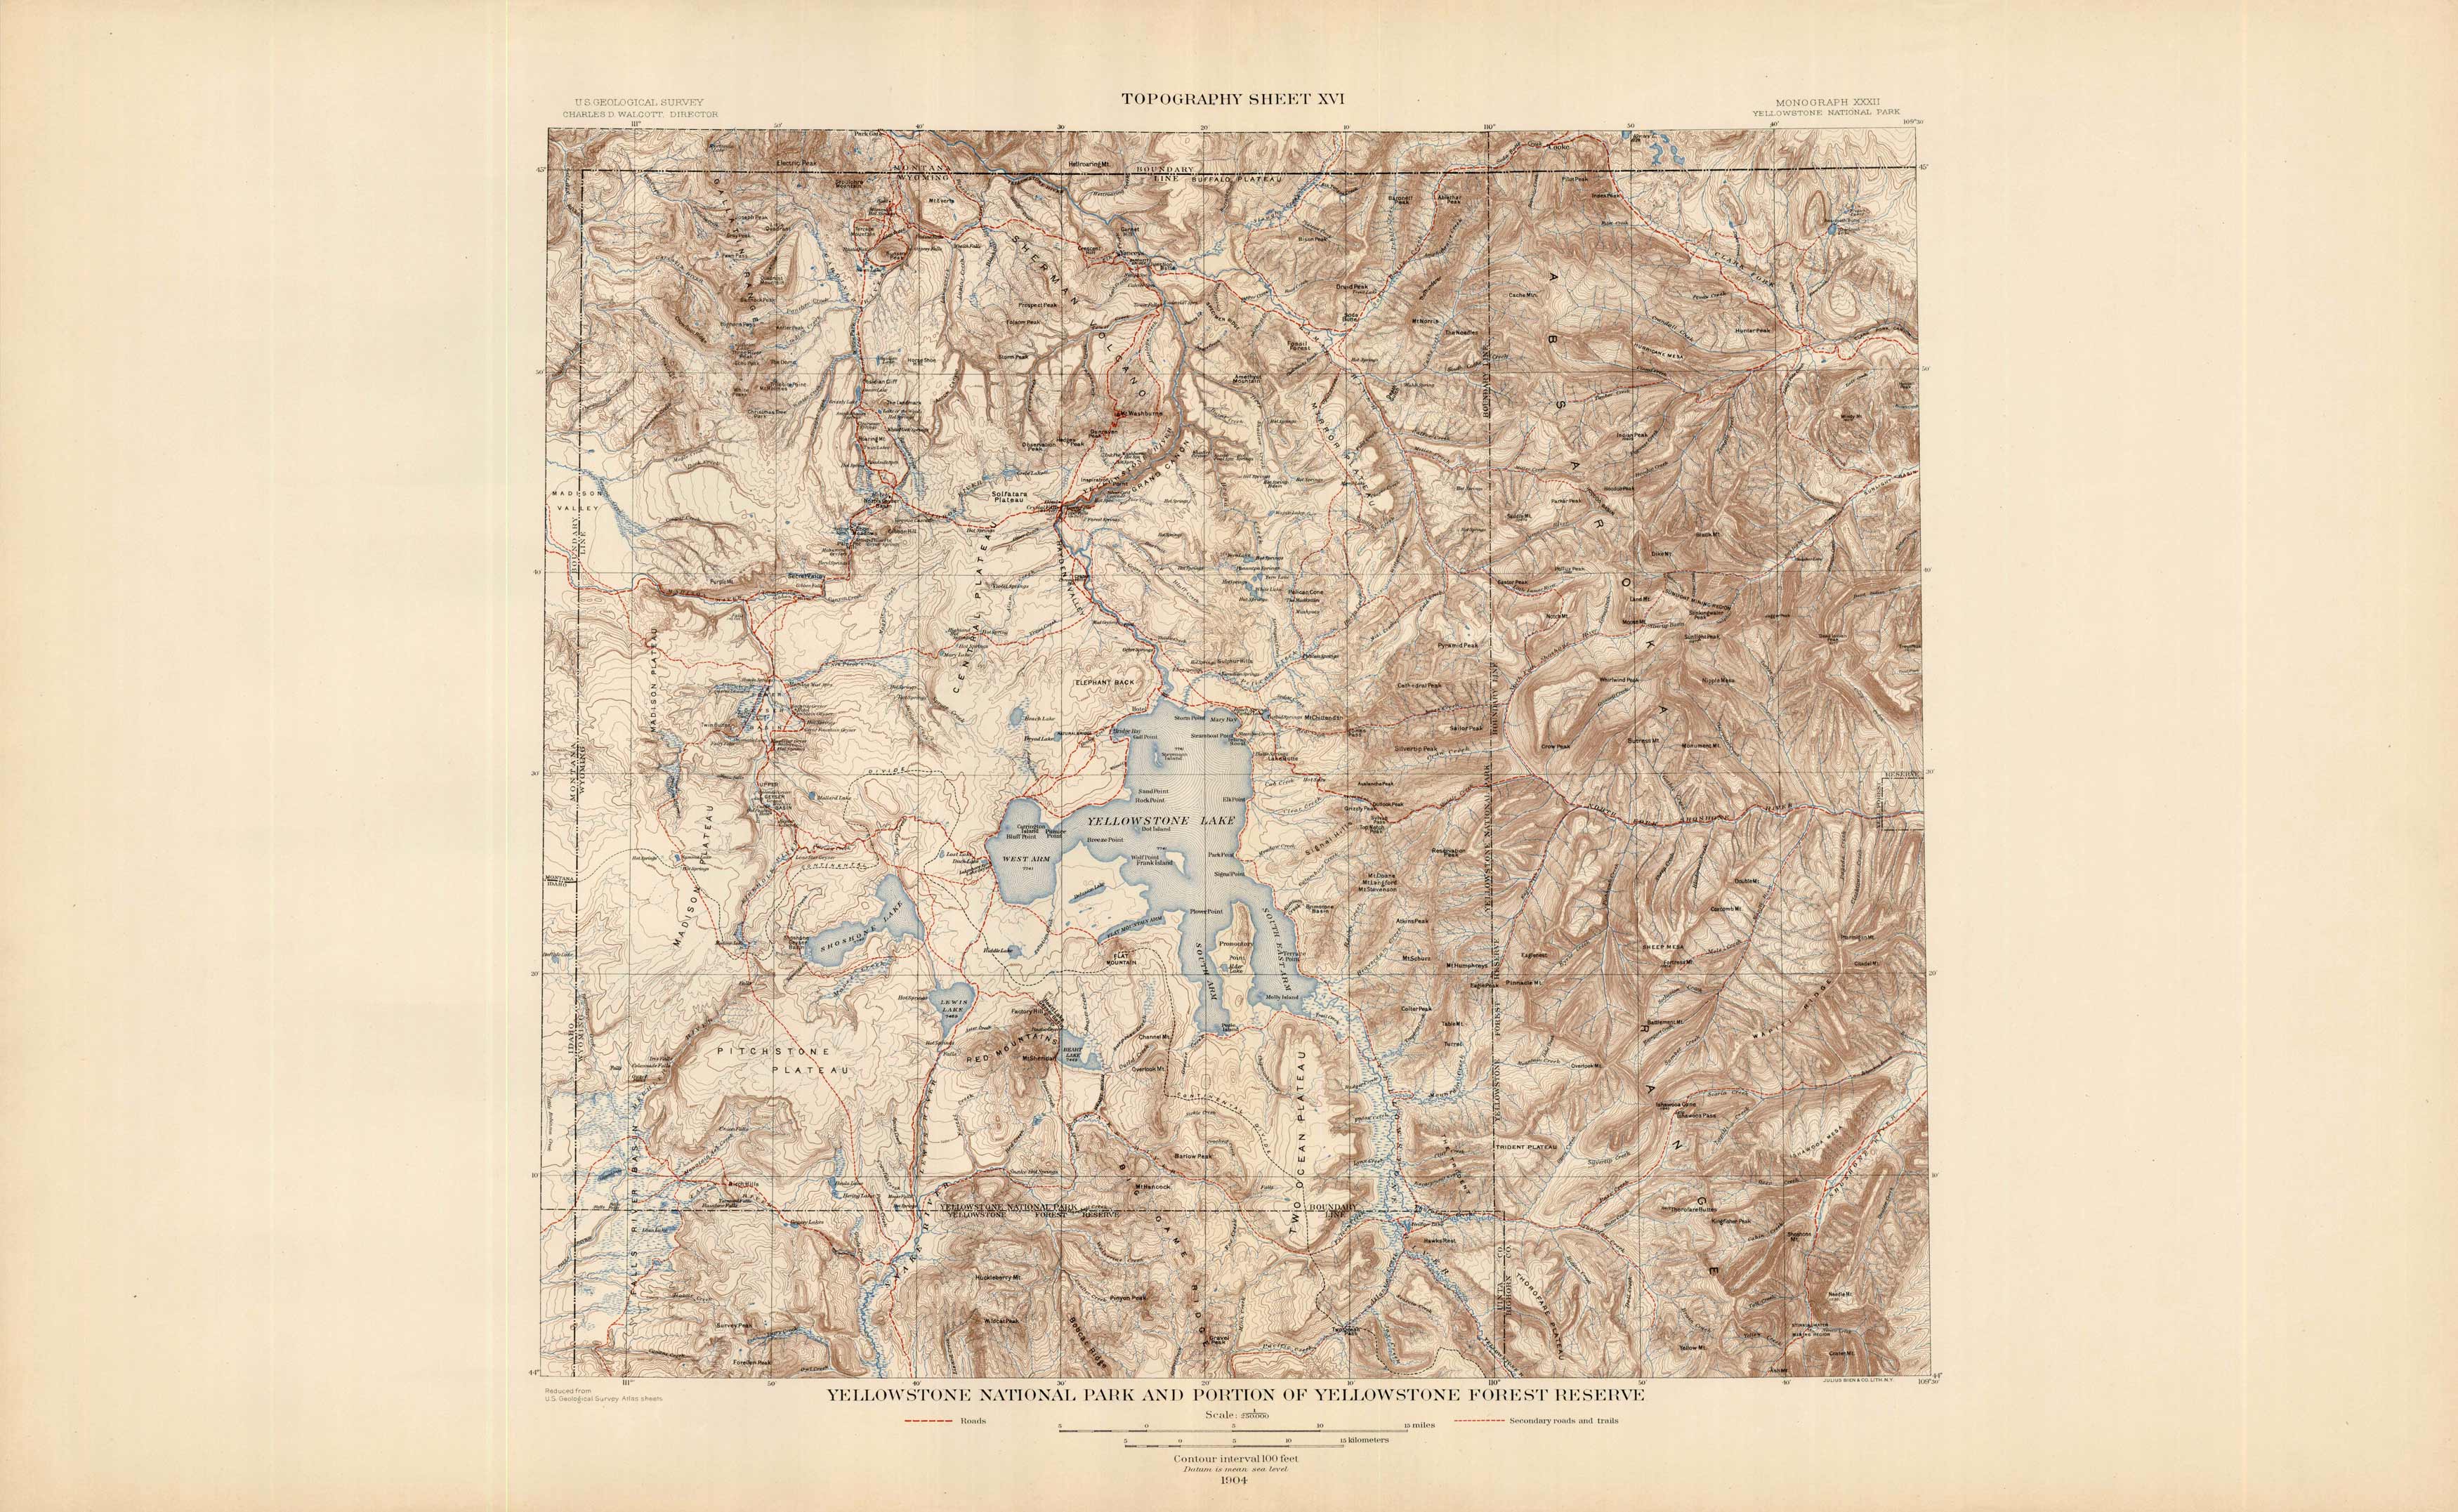 Yellowstone National Park and Portion of Yellowstone Forest Reserve (Topography Sheet XVI)